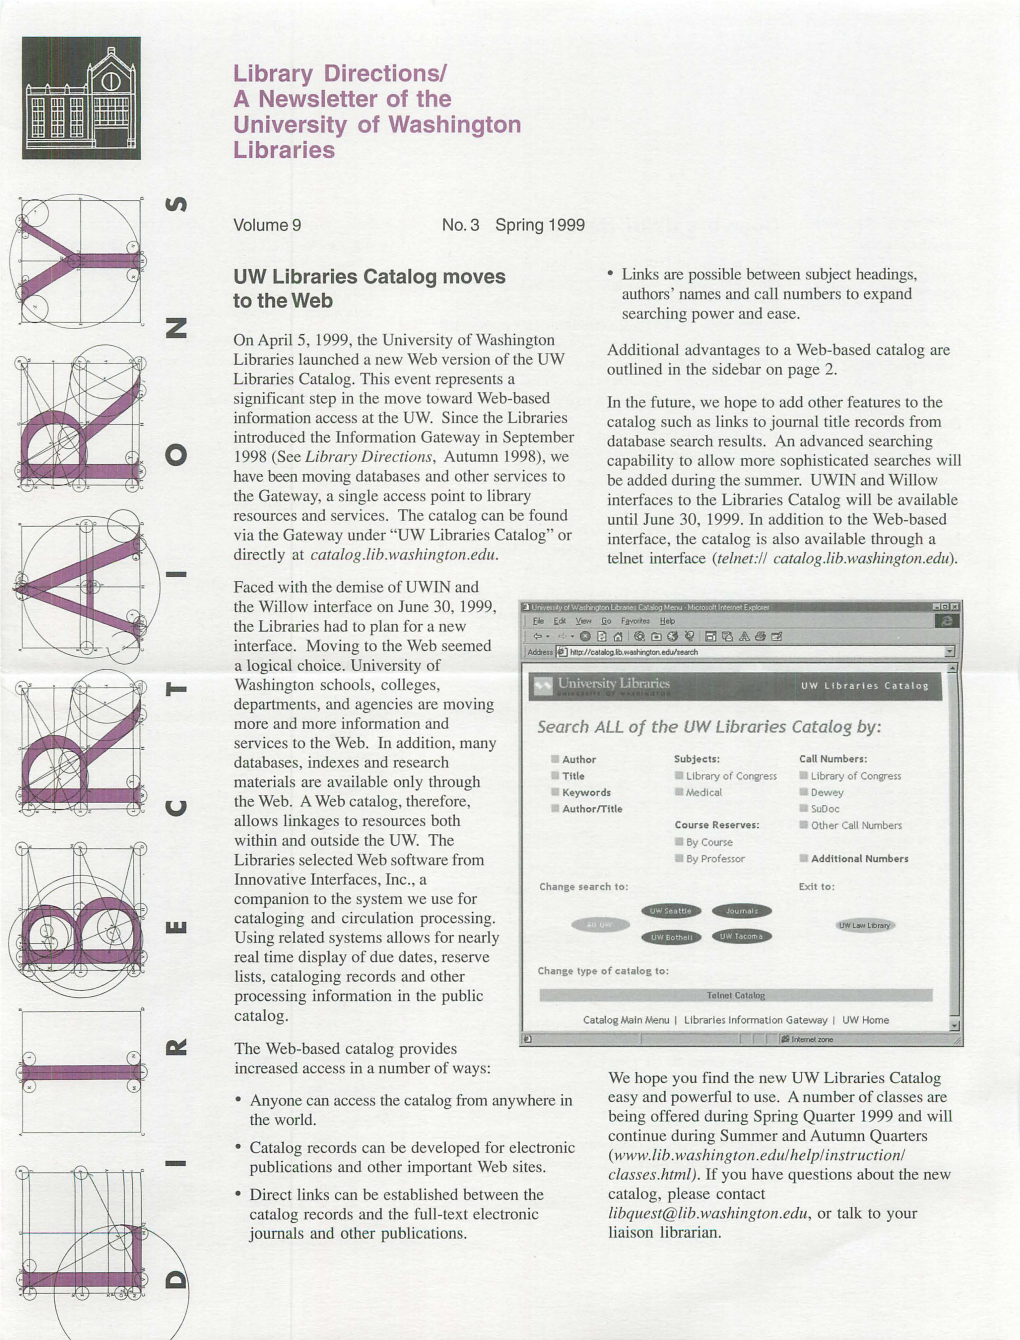 A Newsletter of the University of Washington Libraries